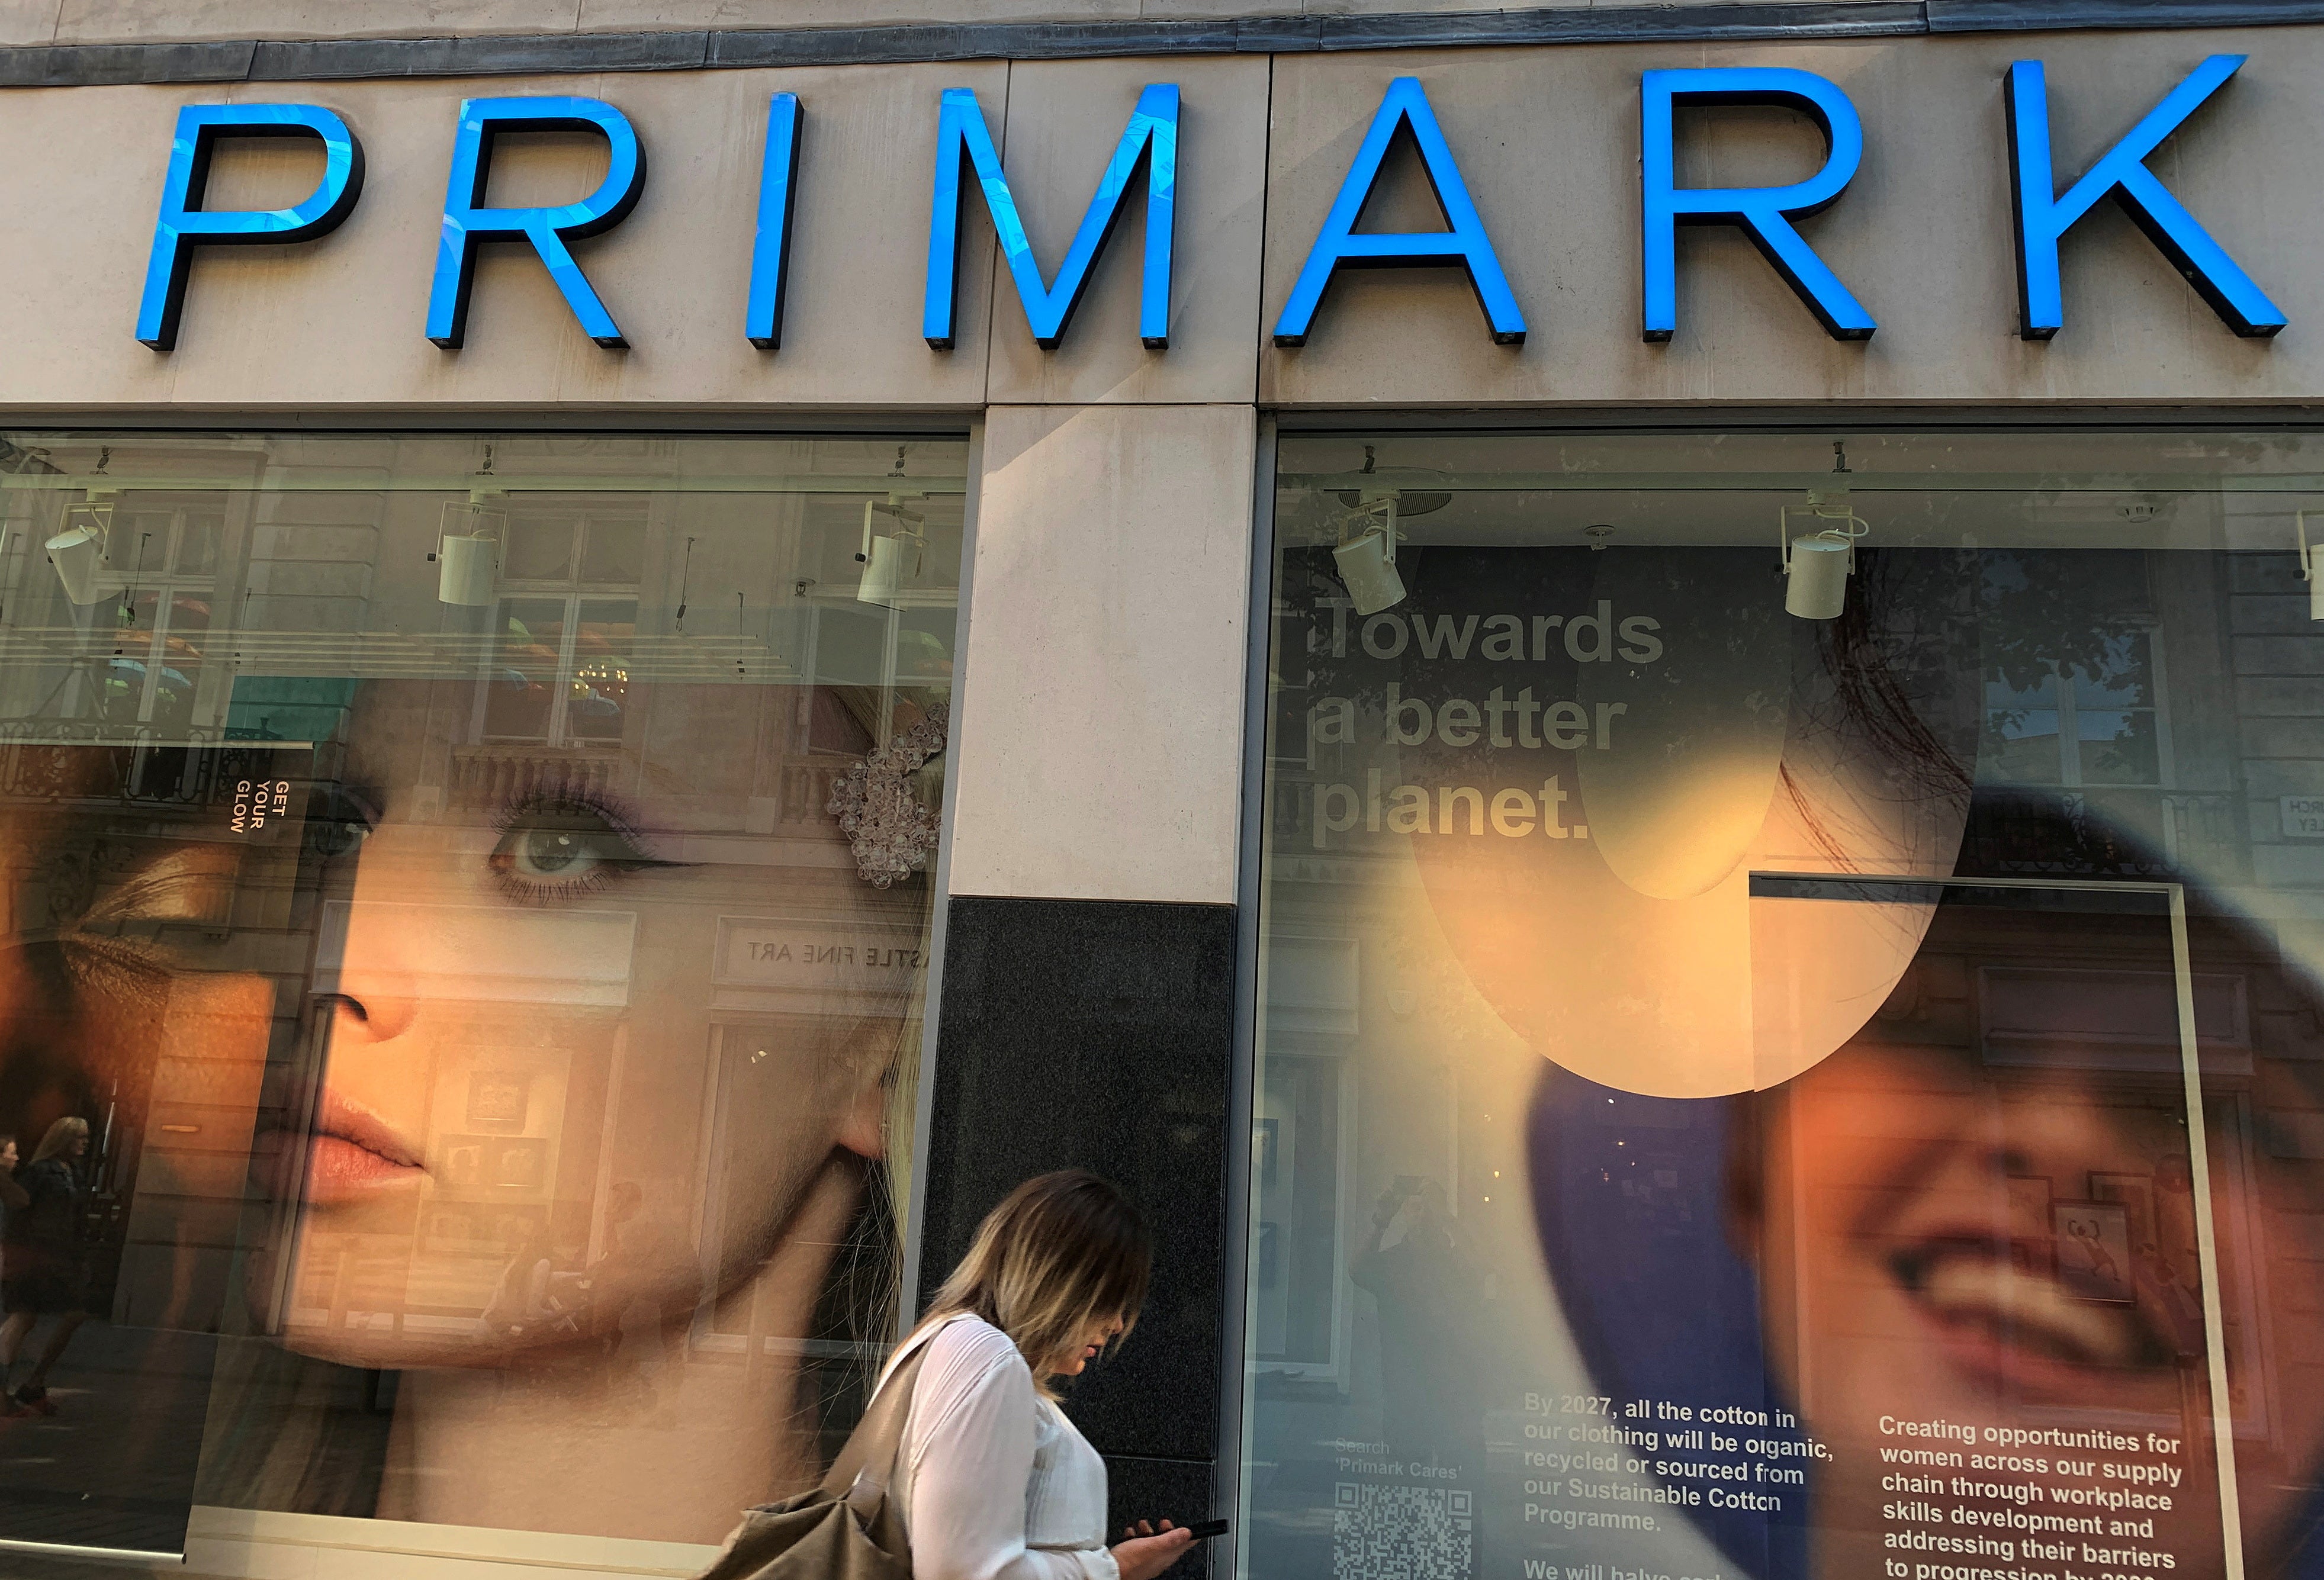 Primark has the means to tackle soaring energy costs but smaller firms will struggle